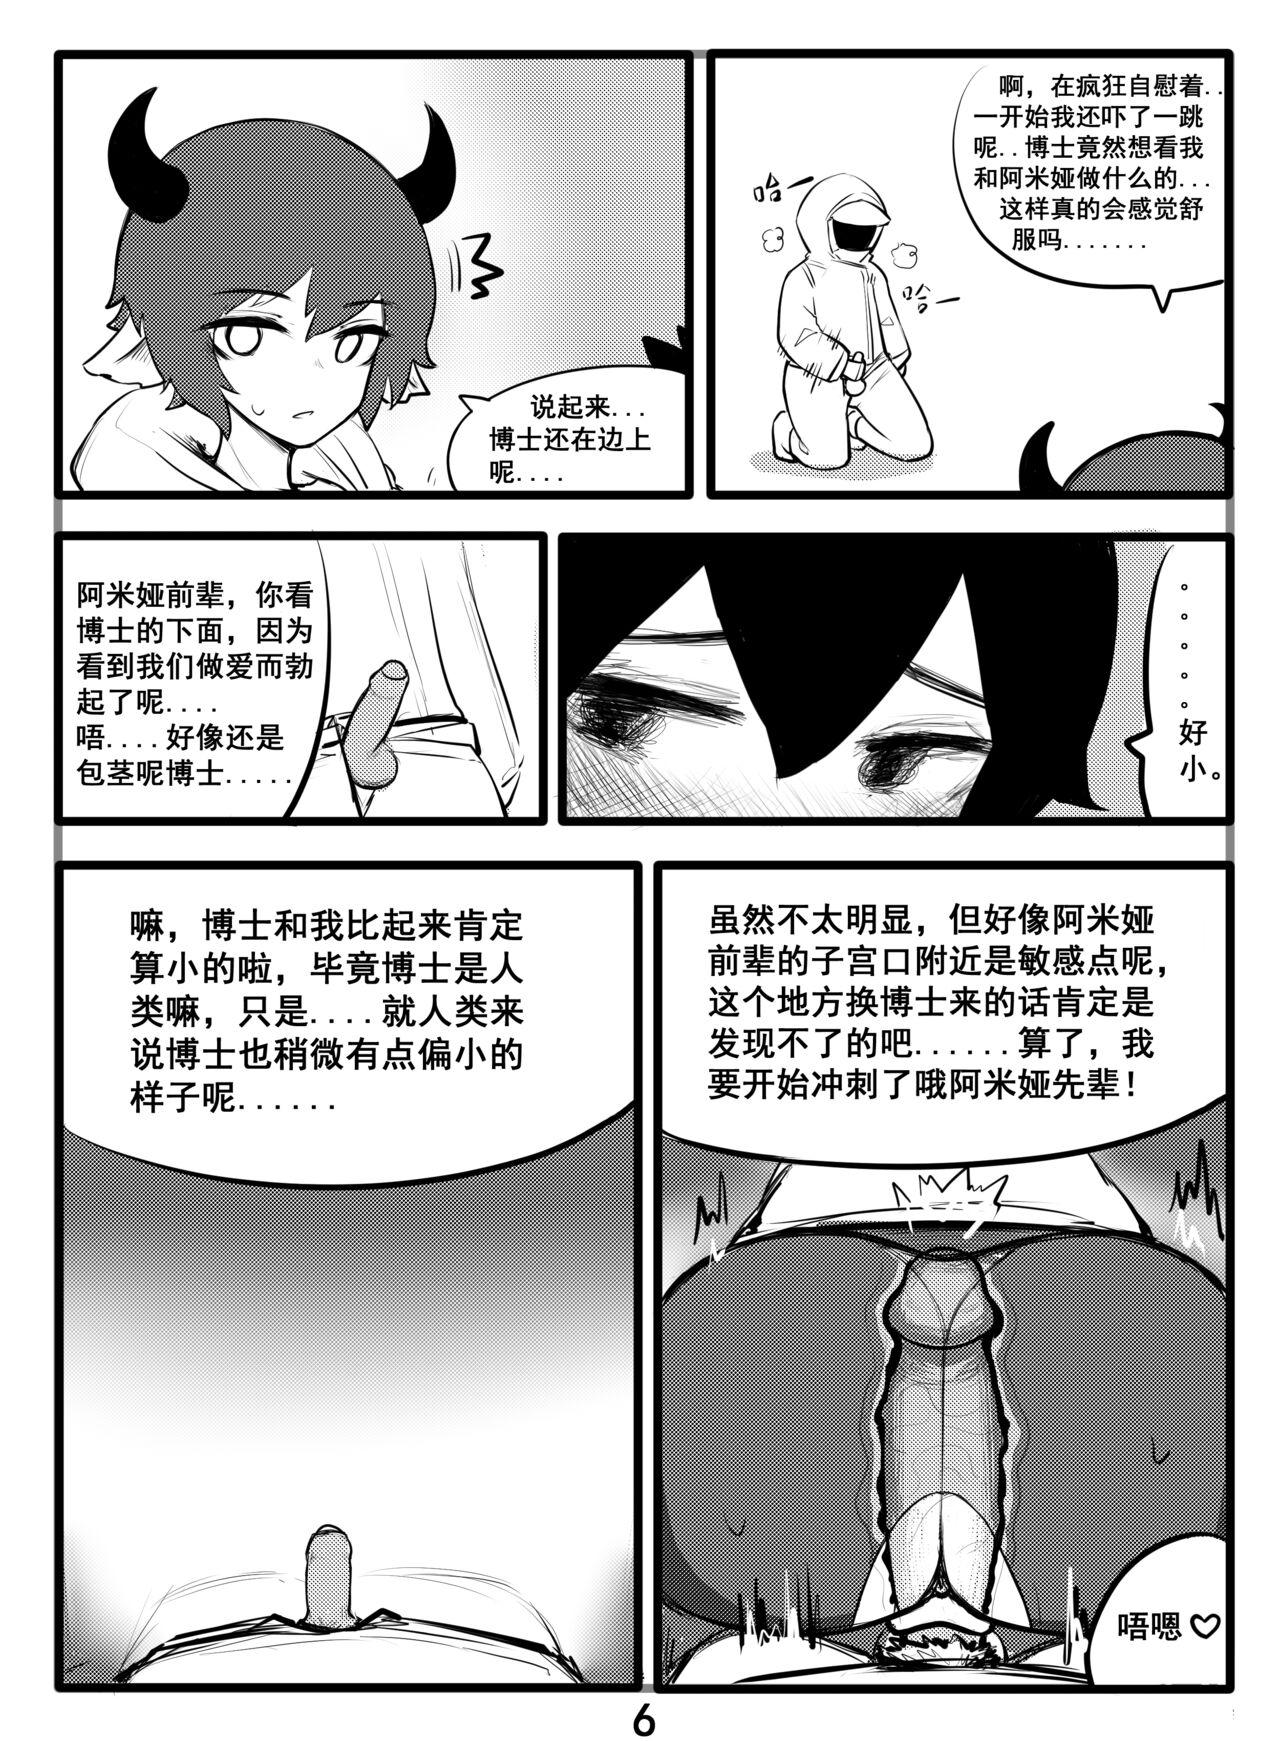 Solo Female 搬运杂图 Tight Ass - Page 6